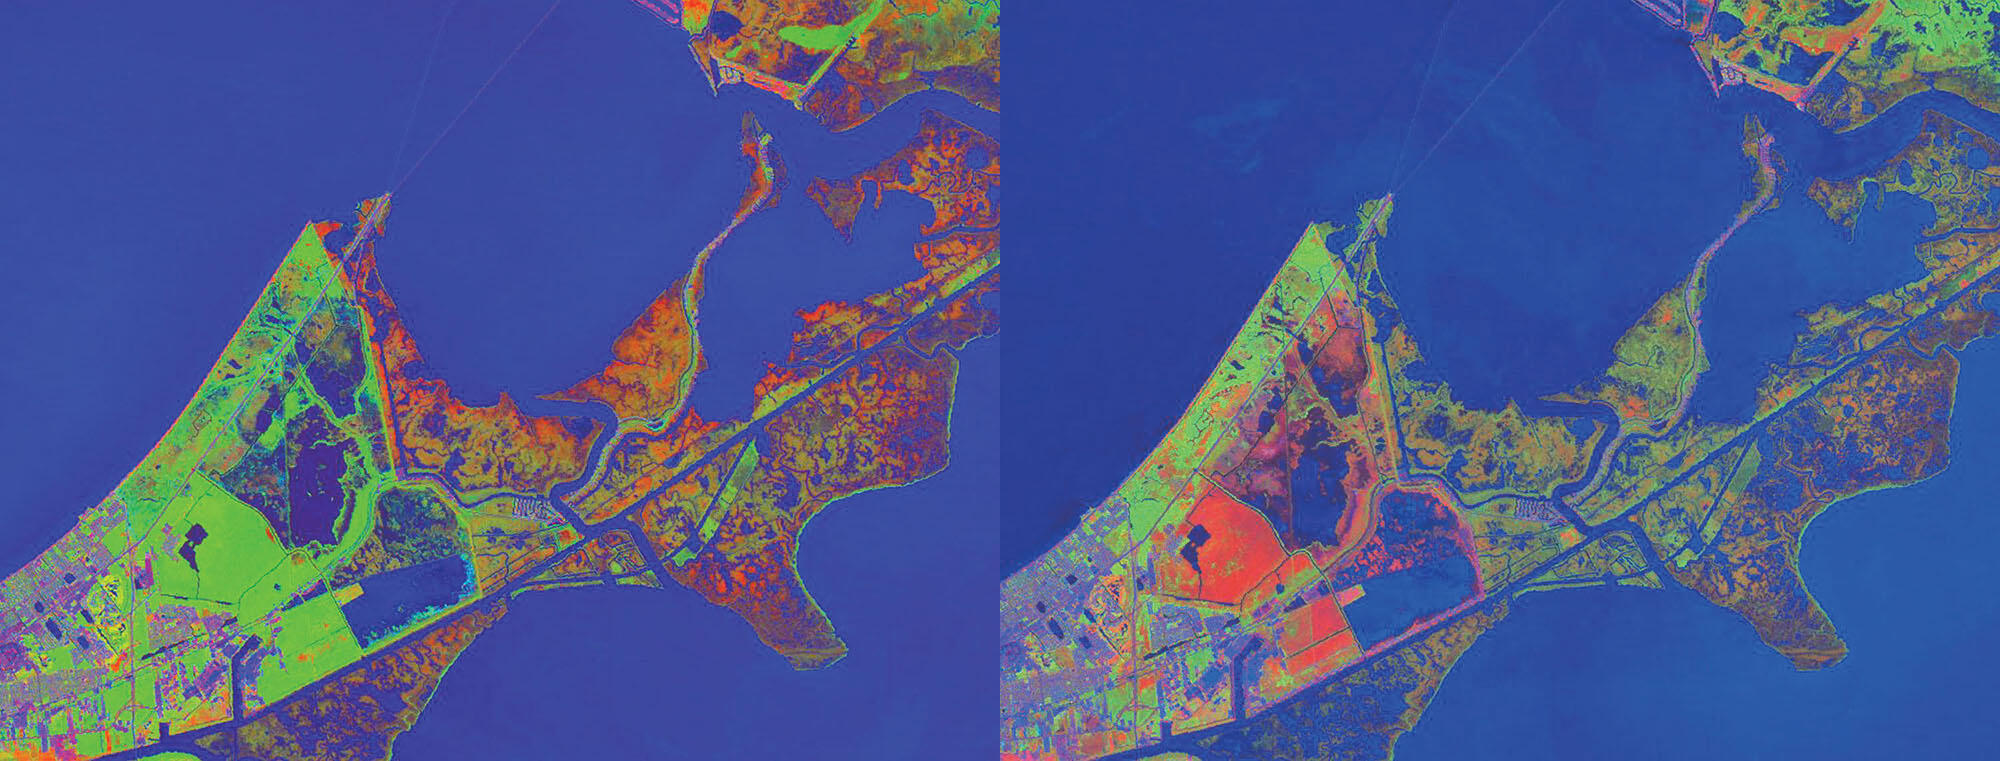 Spectral Mixture Analysis images showing the devestation of vegetation around New Orleans area before and after Hurricane Katrina. Images Jeffrey Chambers.)